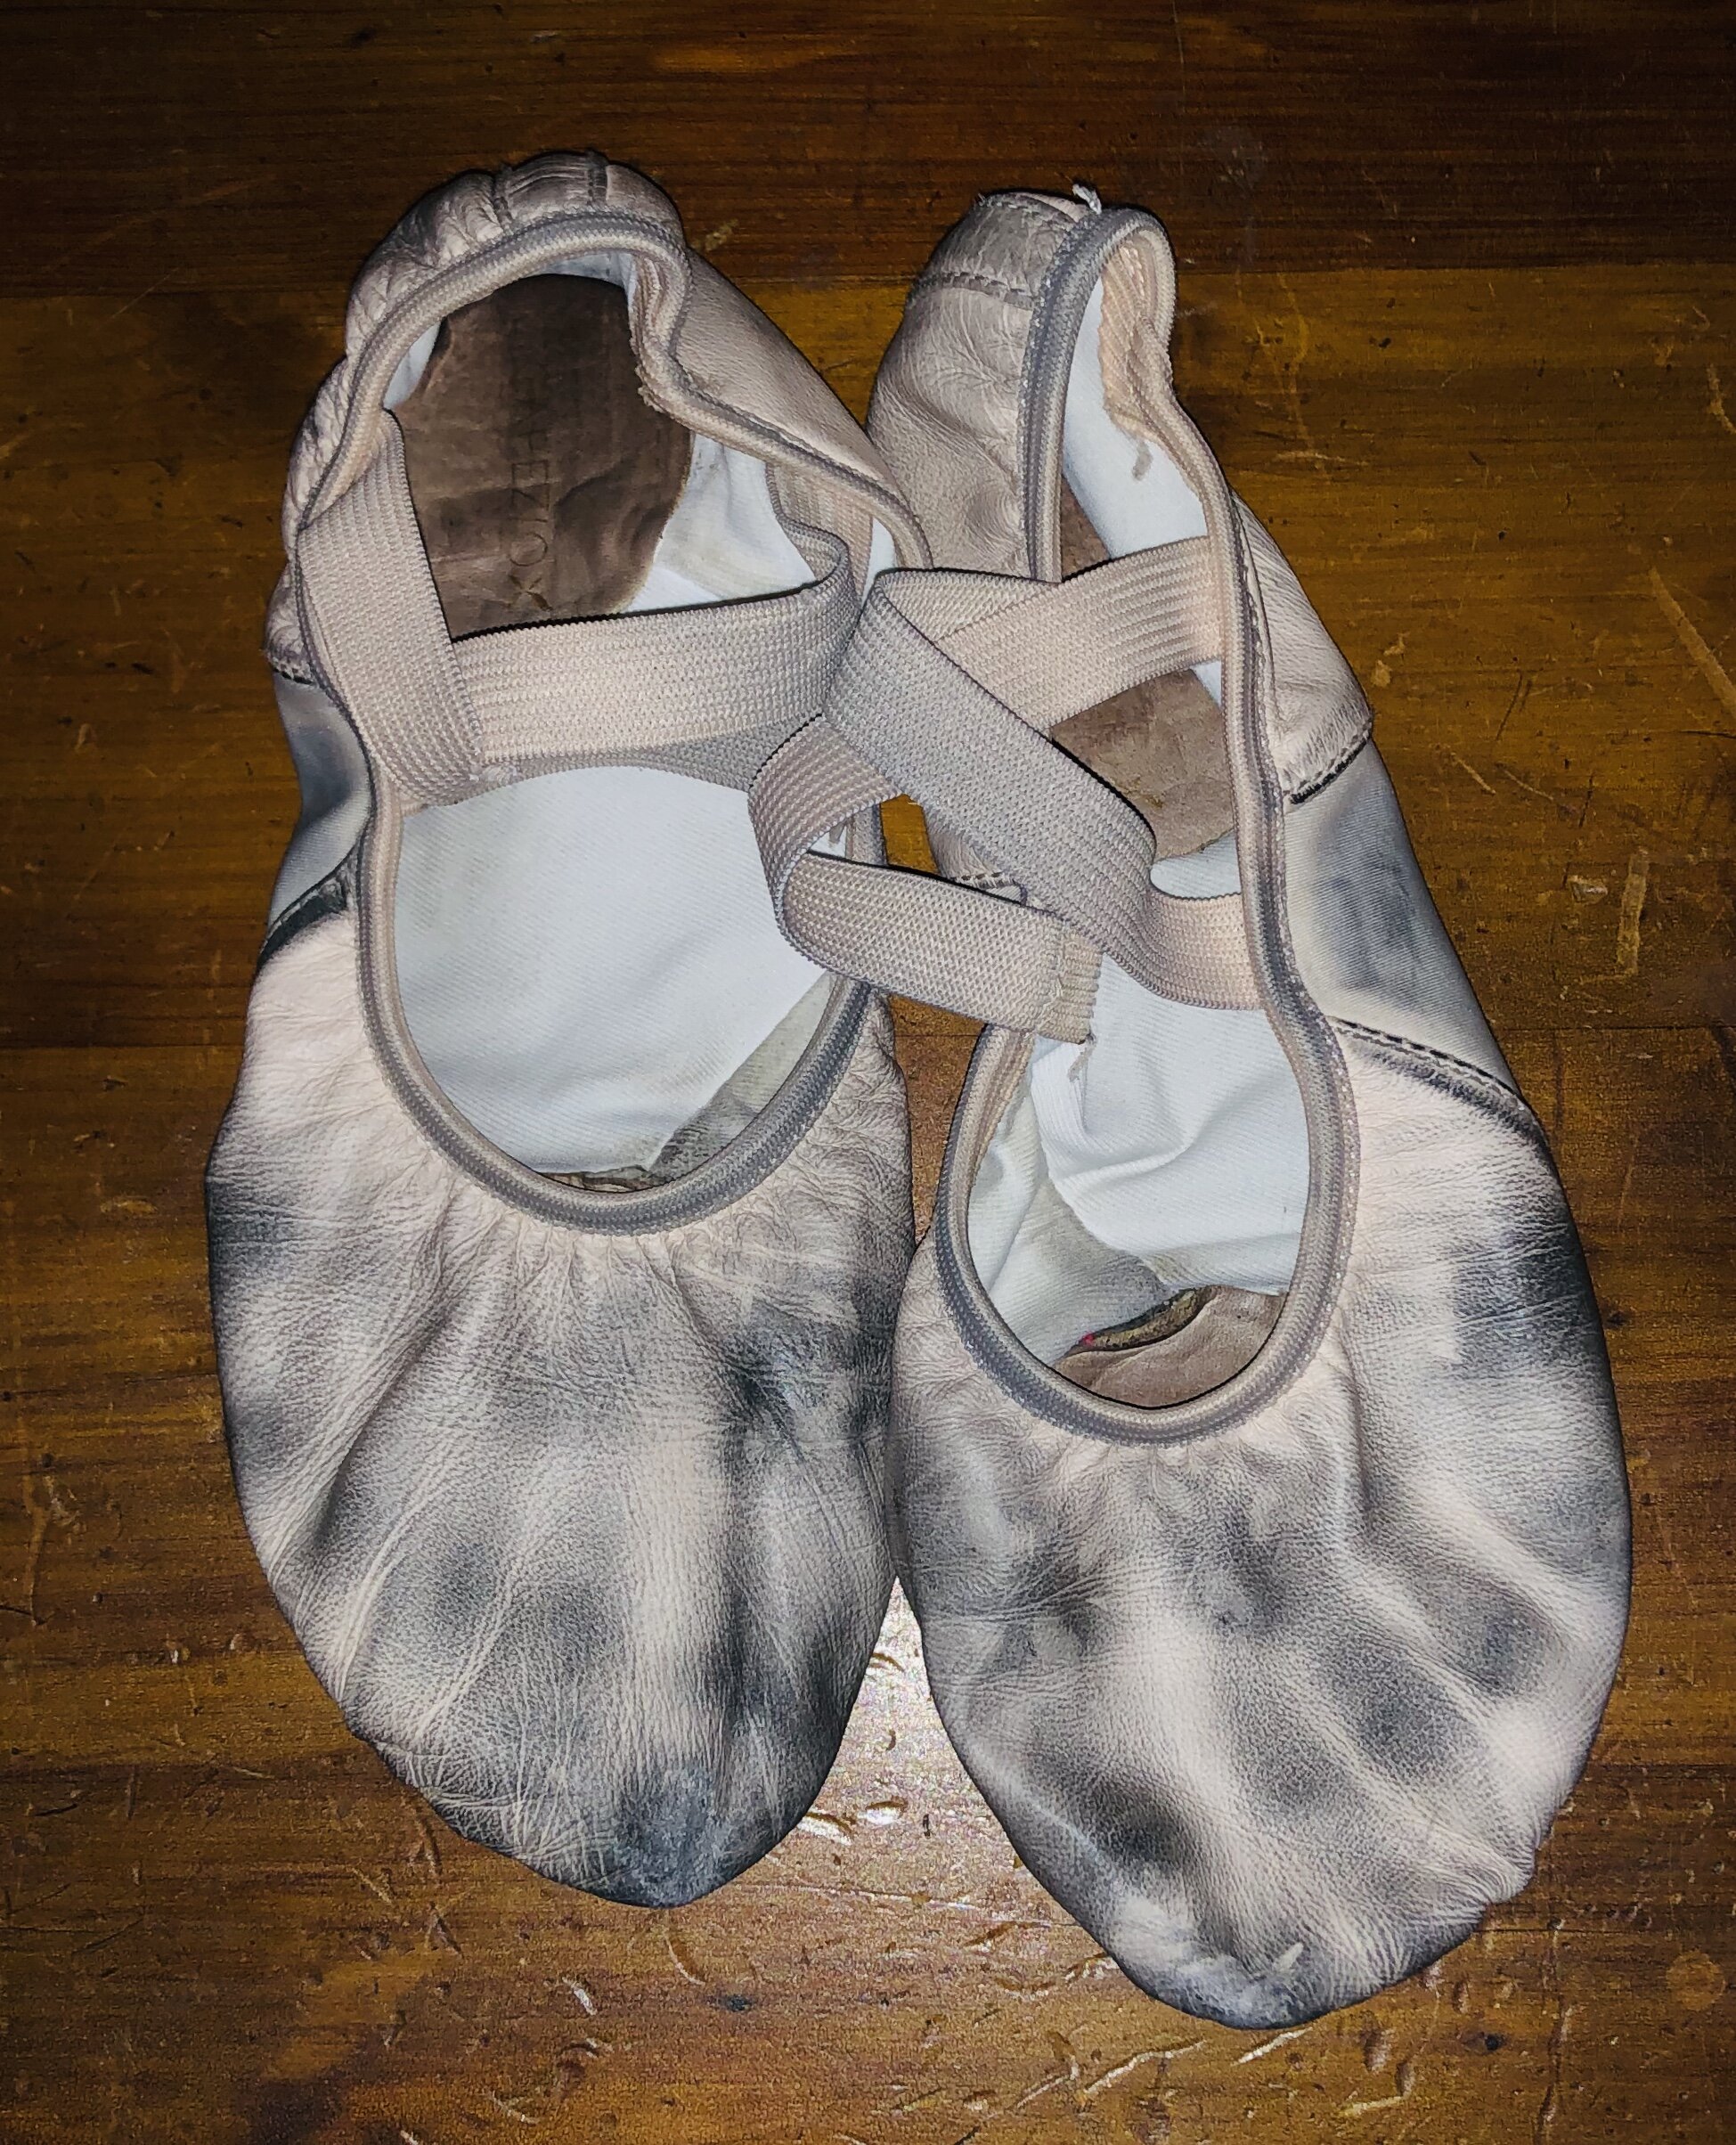 How to Clean Leather Ballet Shoes?